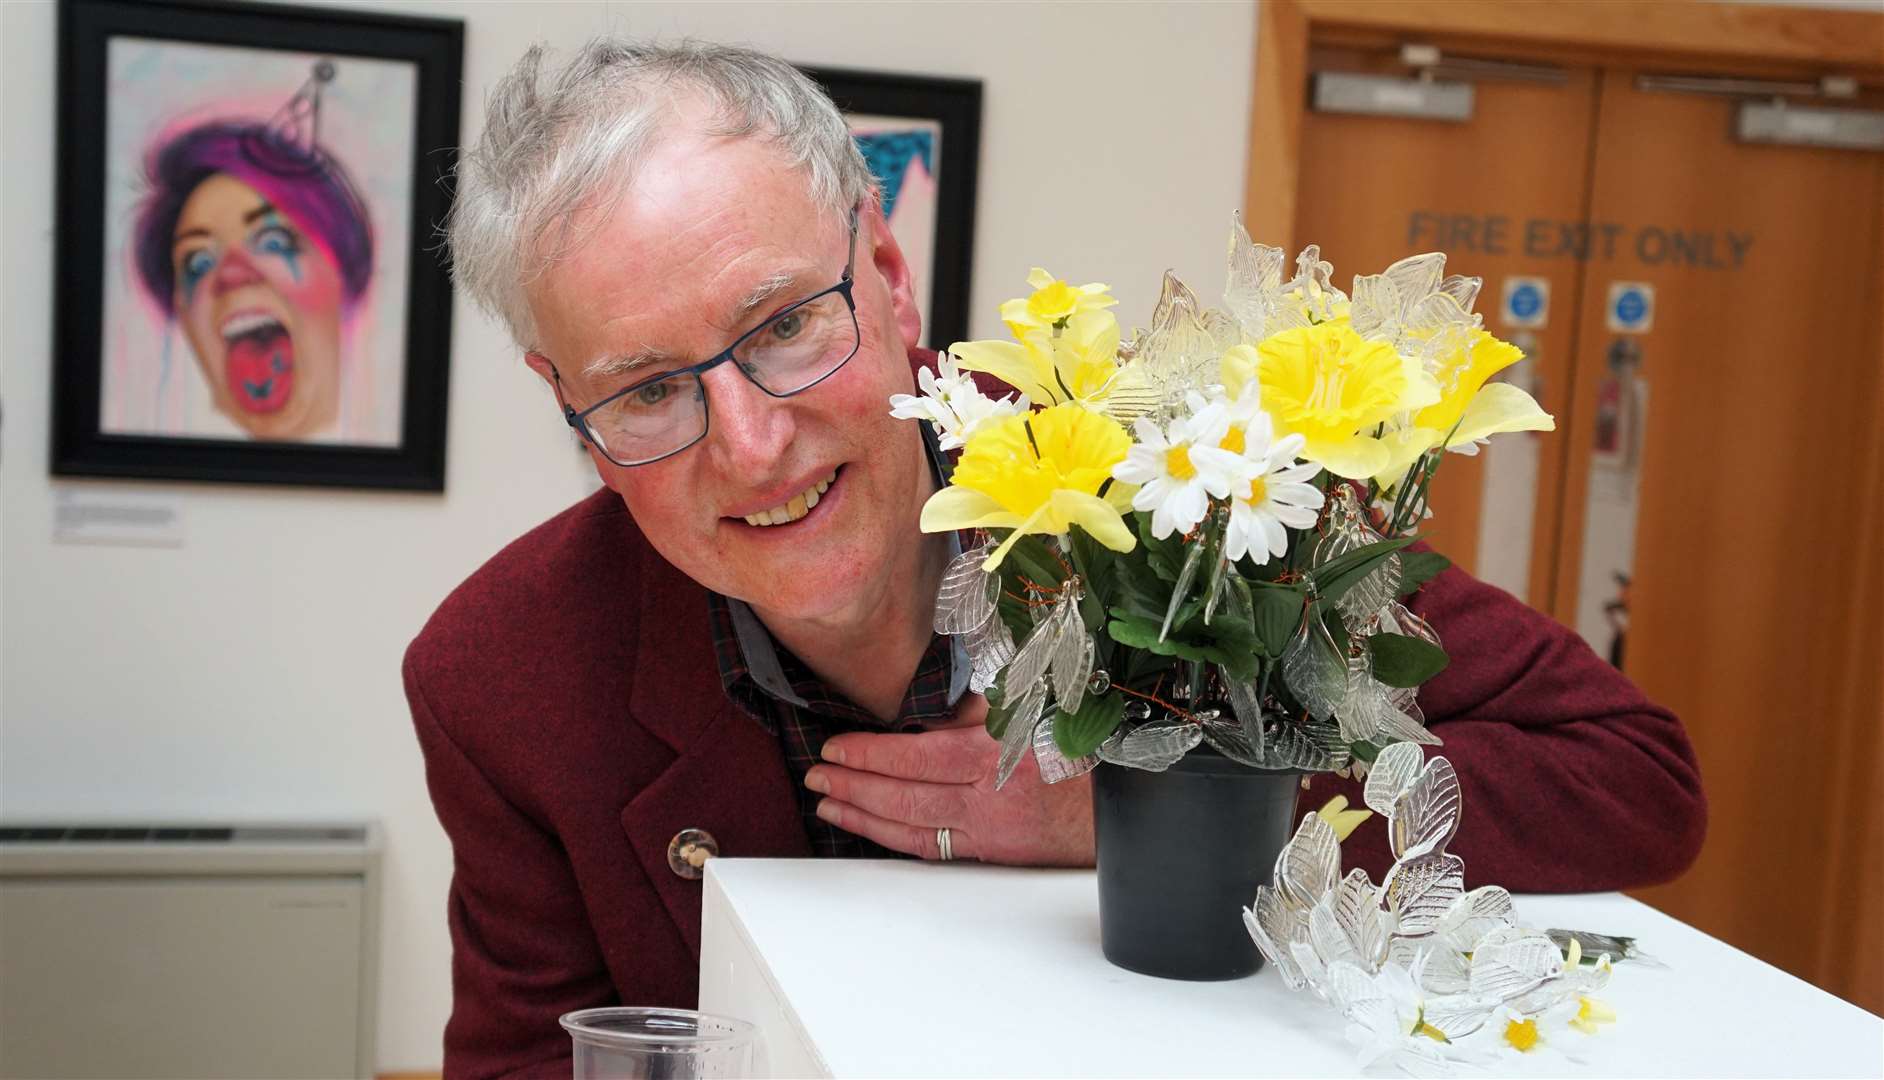 Ian Pearson captures the joy of the emerging spring season with this glasswork. Picture: DGS